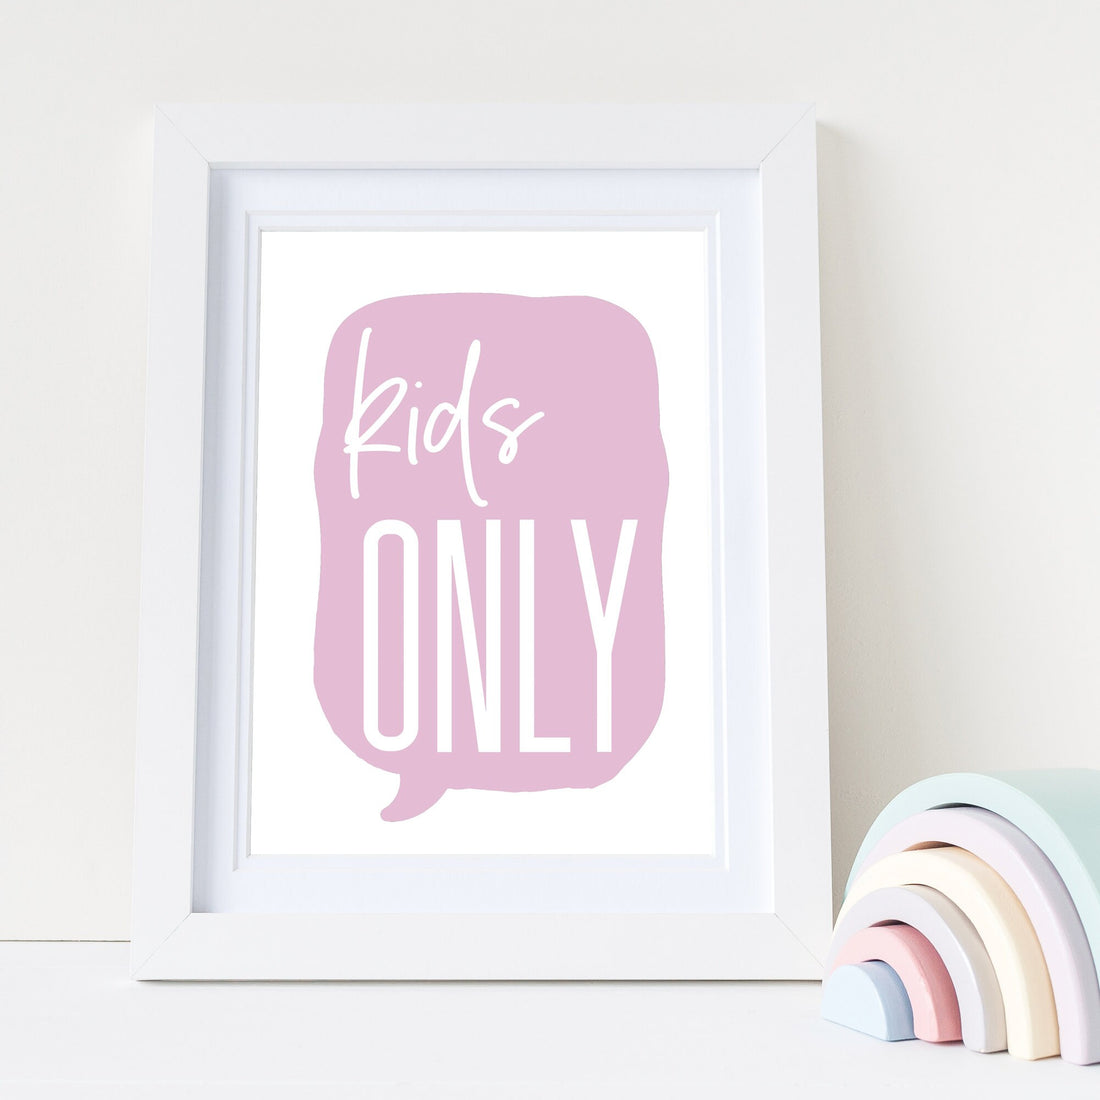 pink kids only Print